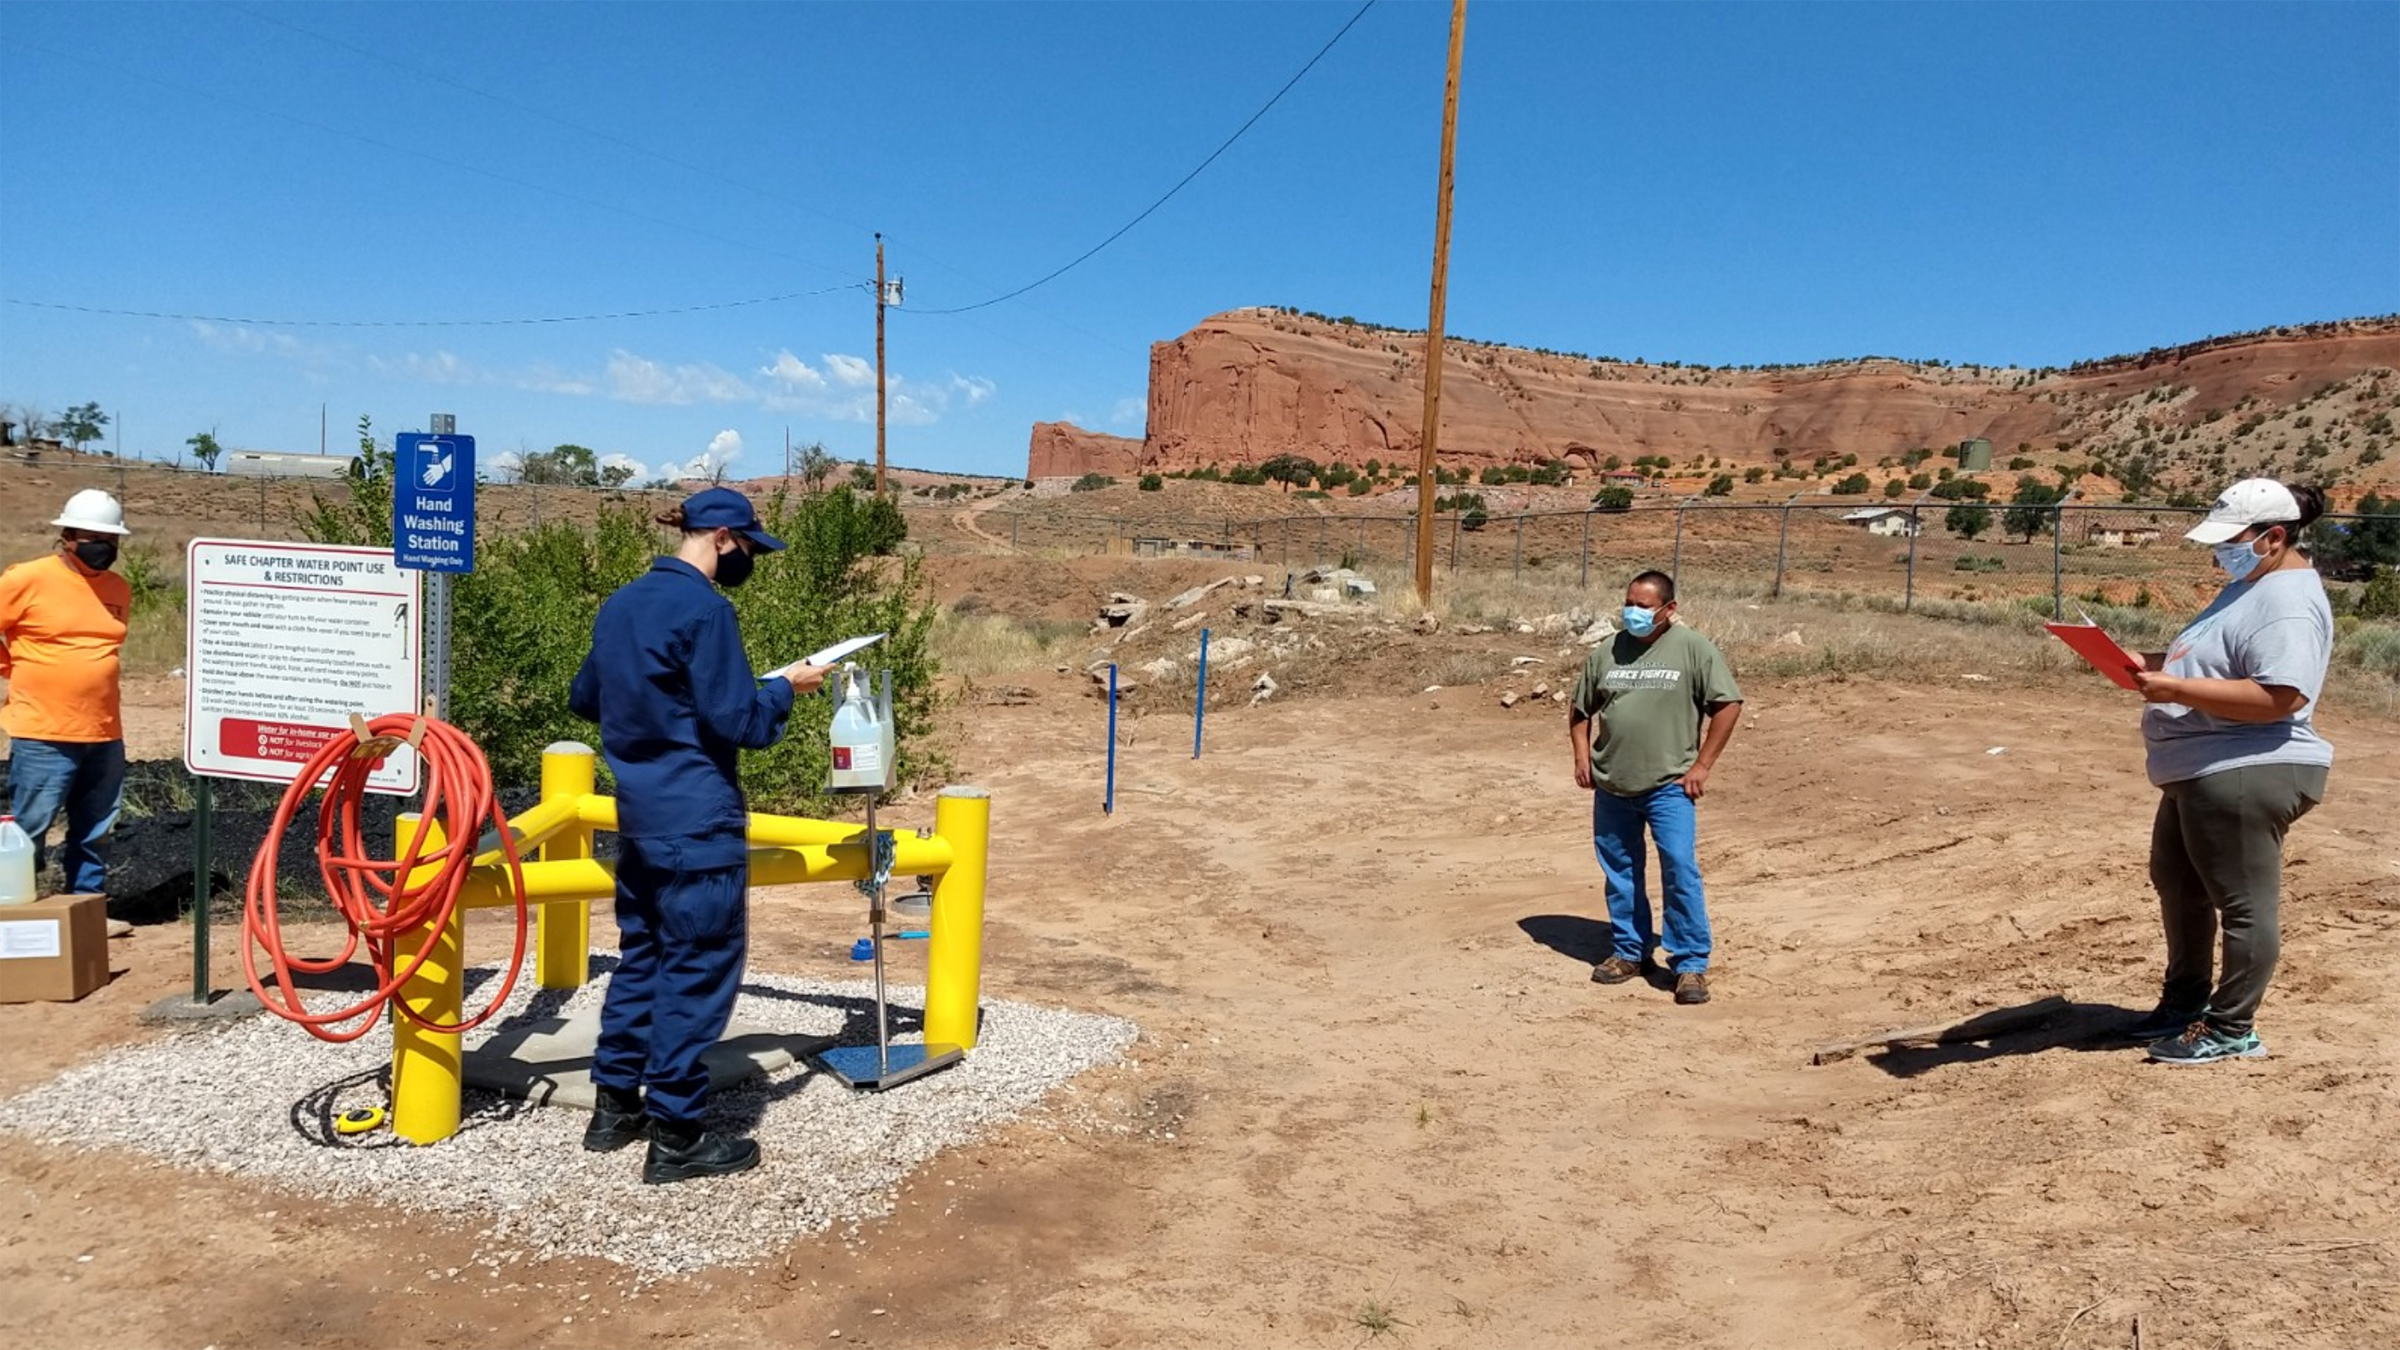 Members of the Navajo Nation COVID-19 Water Access Coordination Group working outdoors